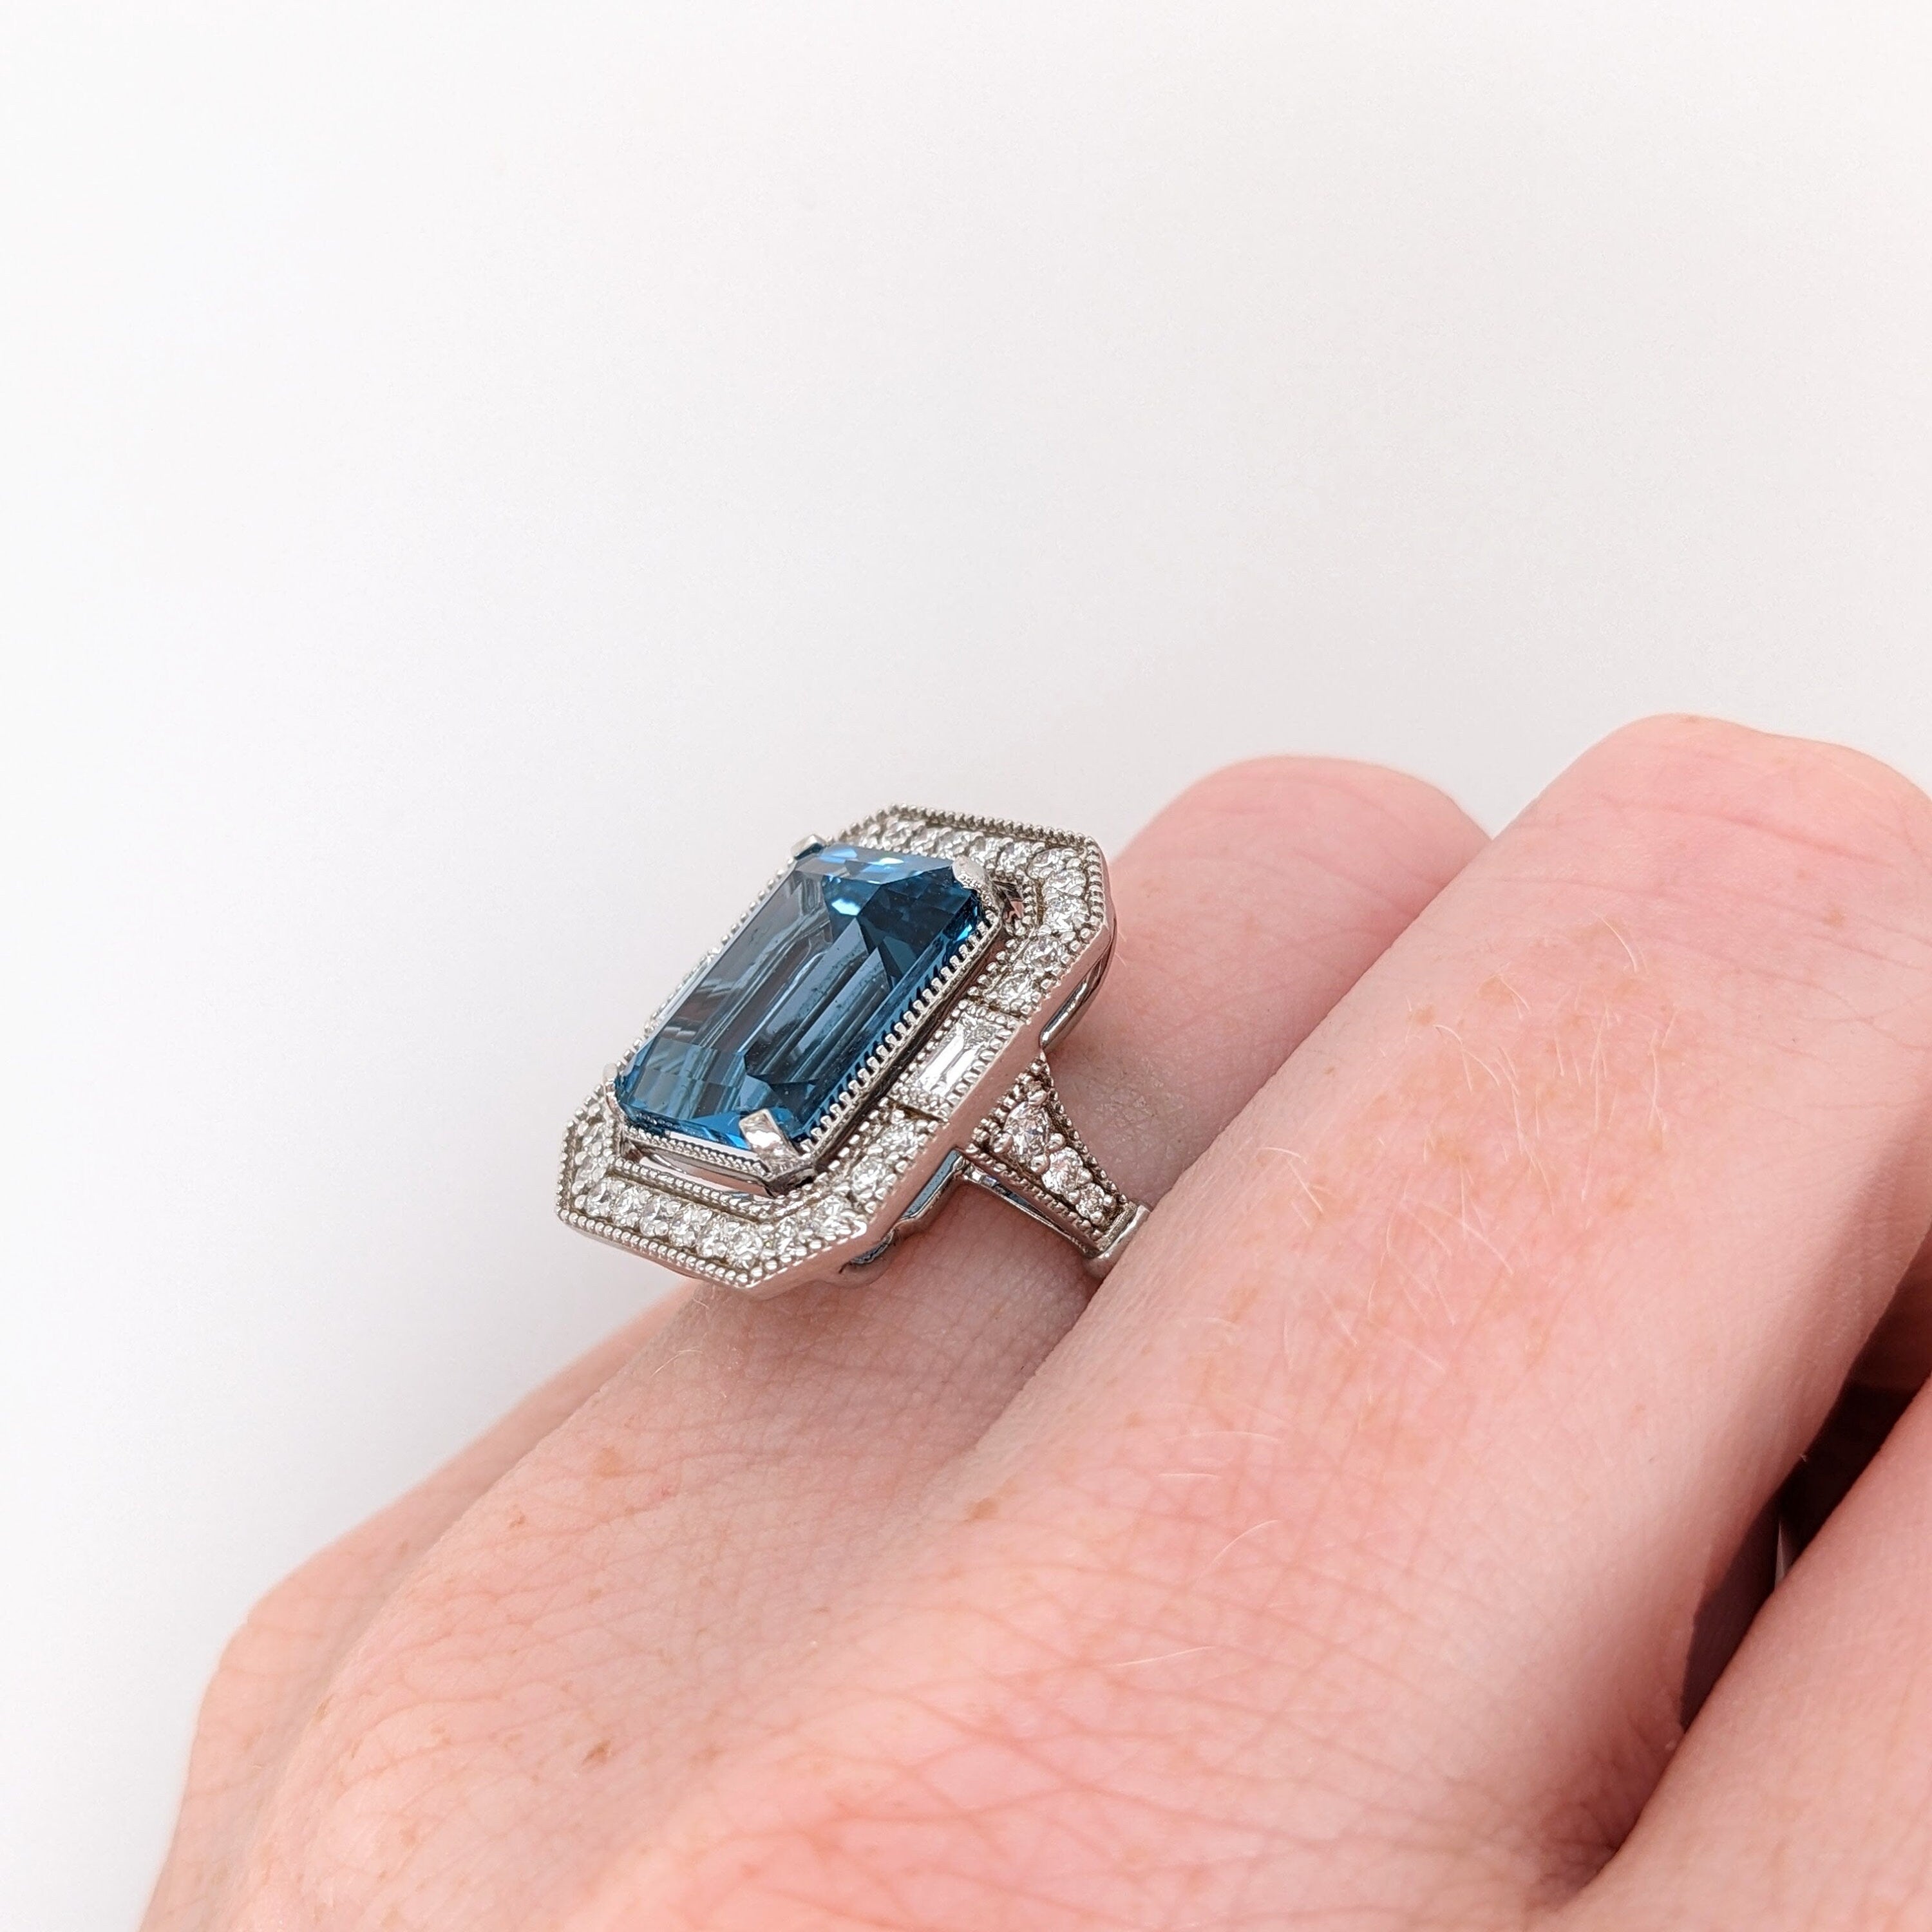 Glamorous London Blue Topaz Ring with All Natural Diamond Pave Halo in Solid 14K White Gold | Emerald Cut 12x10mm | December Birthstone